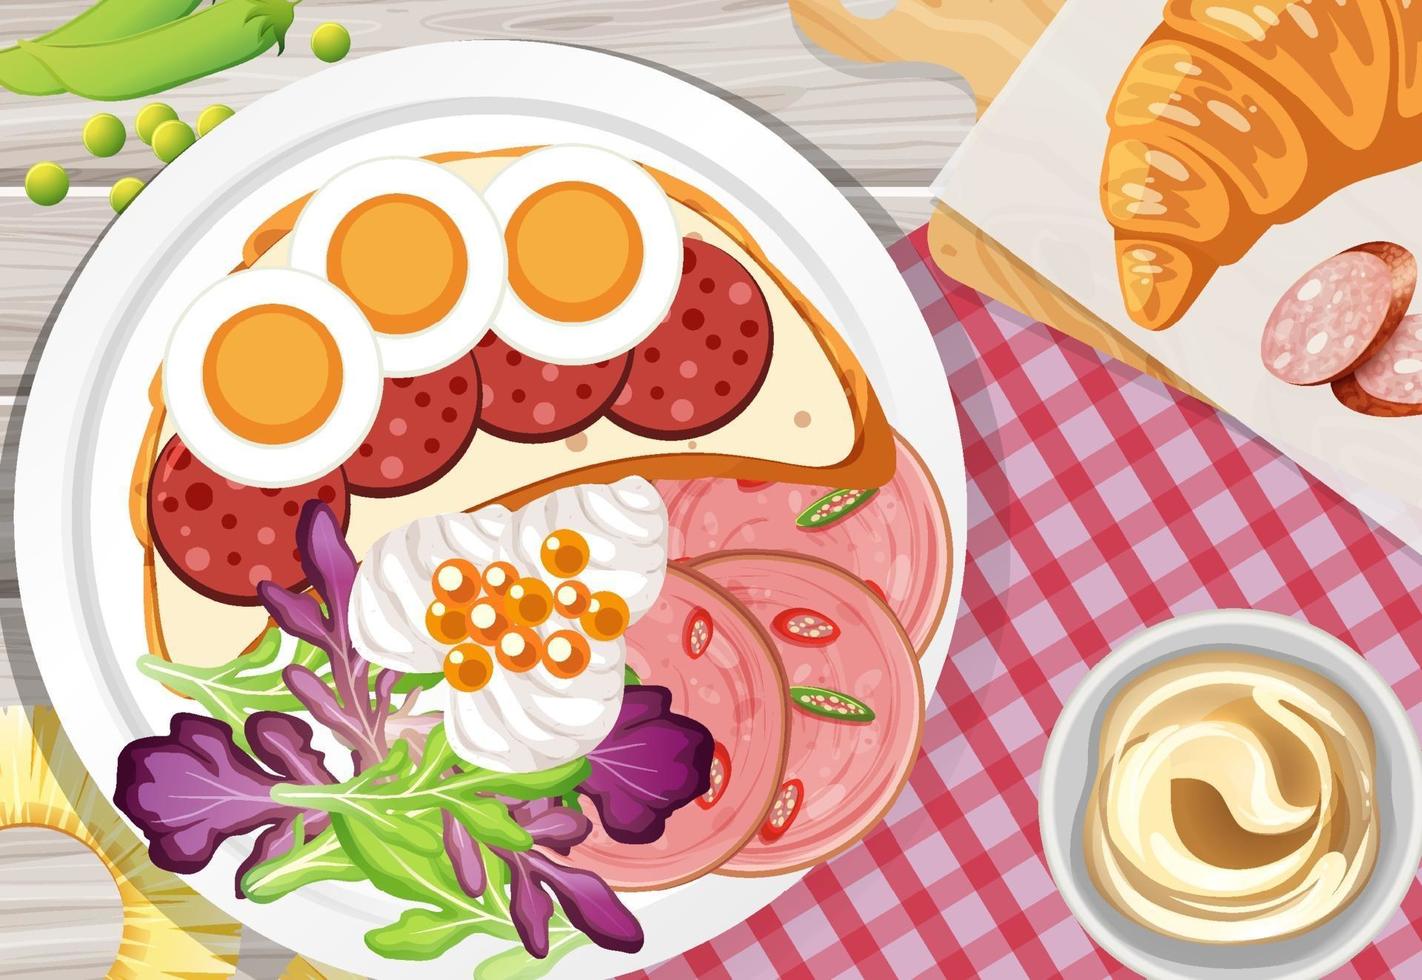 Healthy breakfast set on the table vector